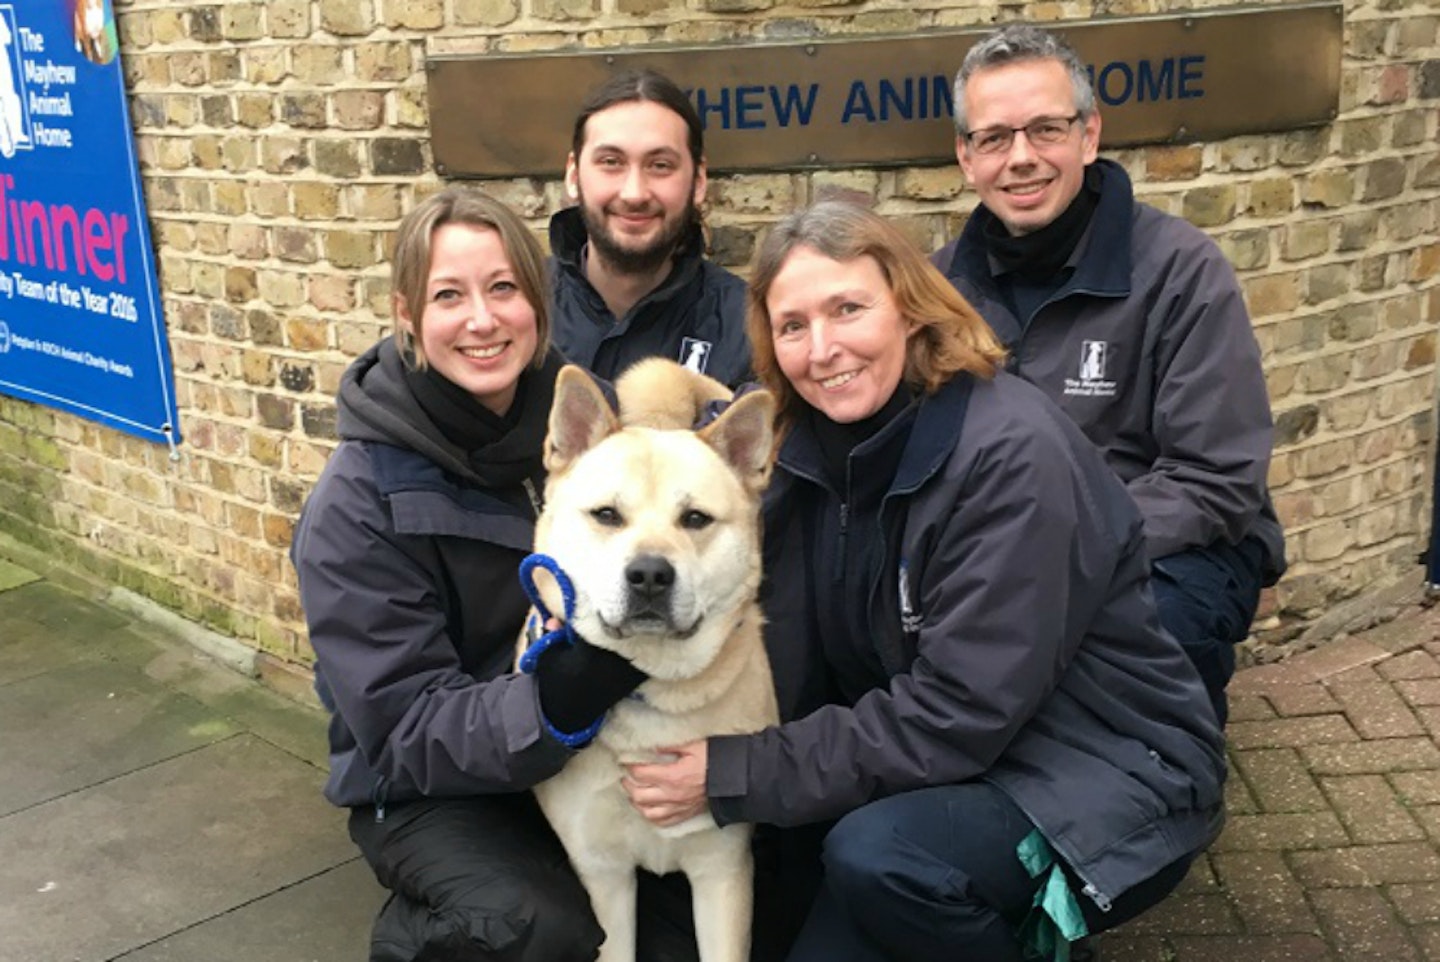 prince-dog-adopted-mayhew-animal-home-shelter-charity-london